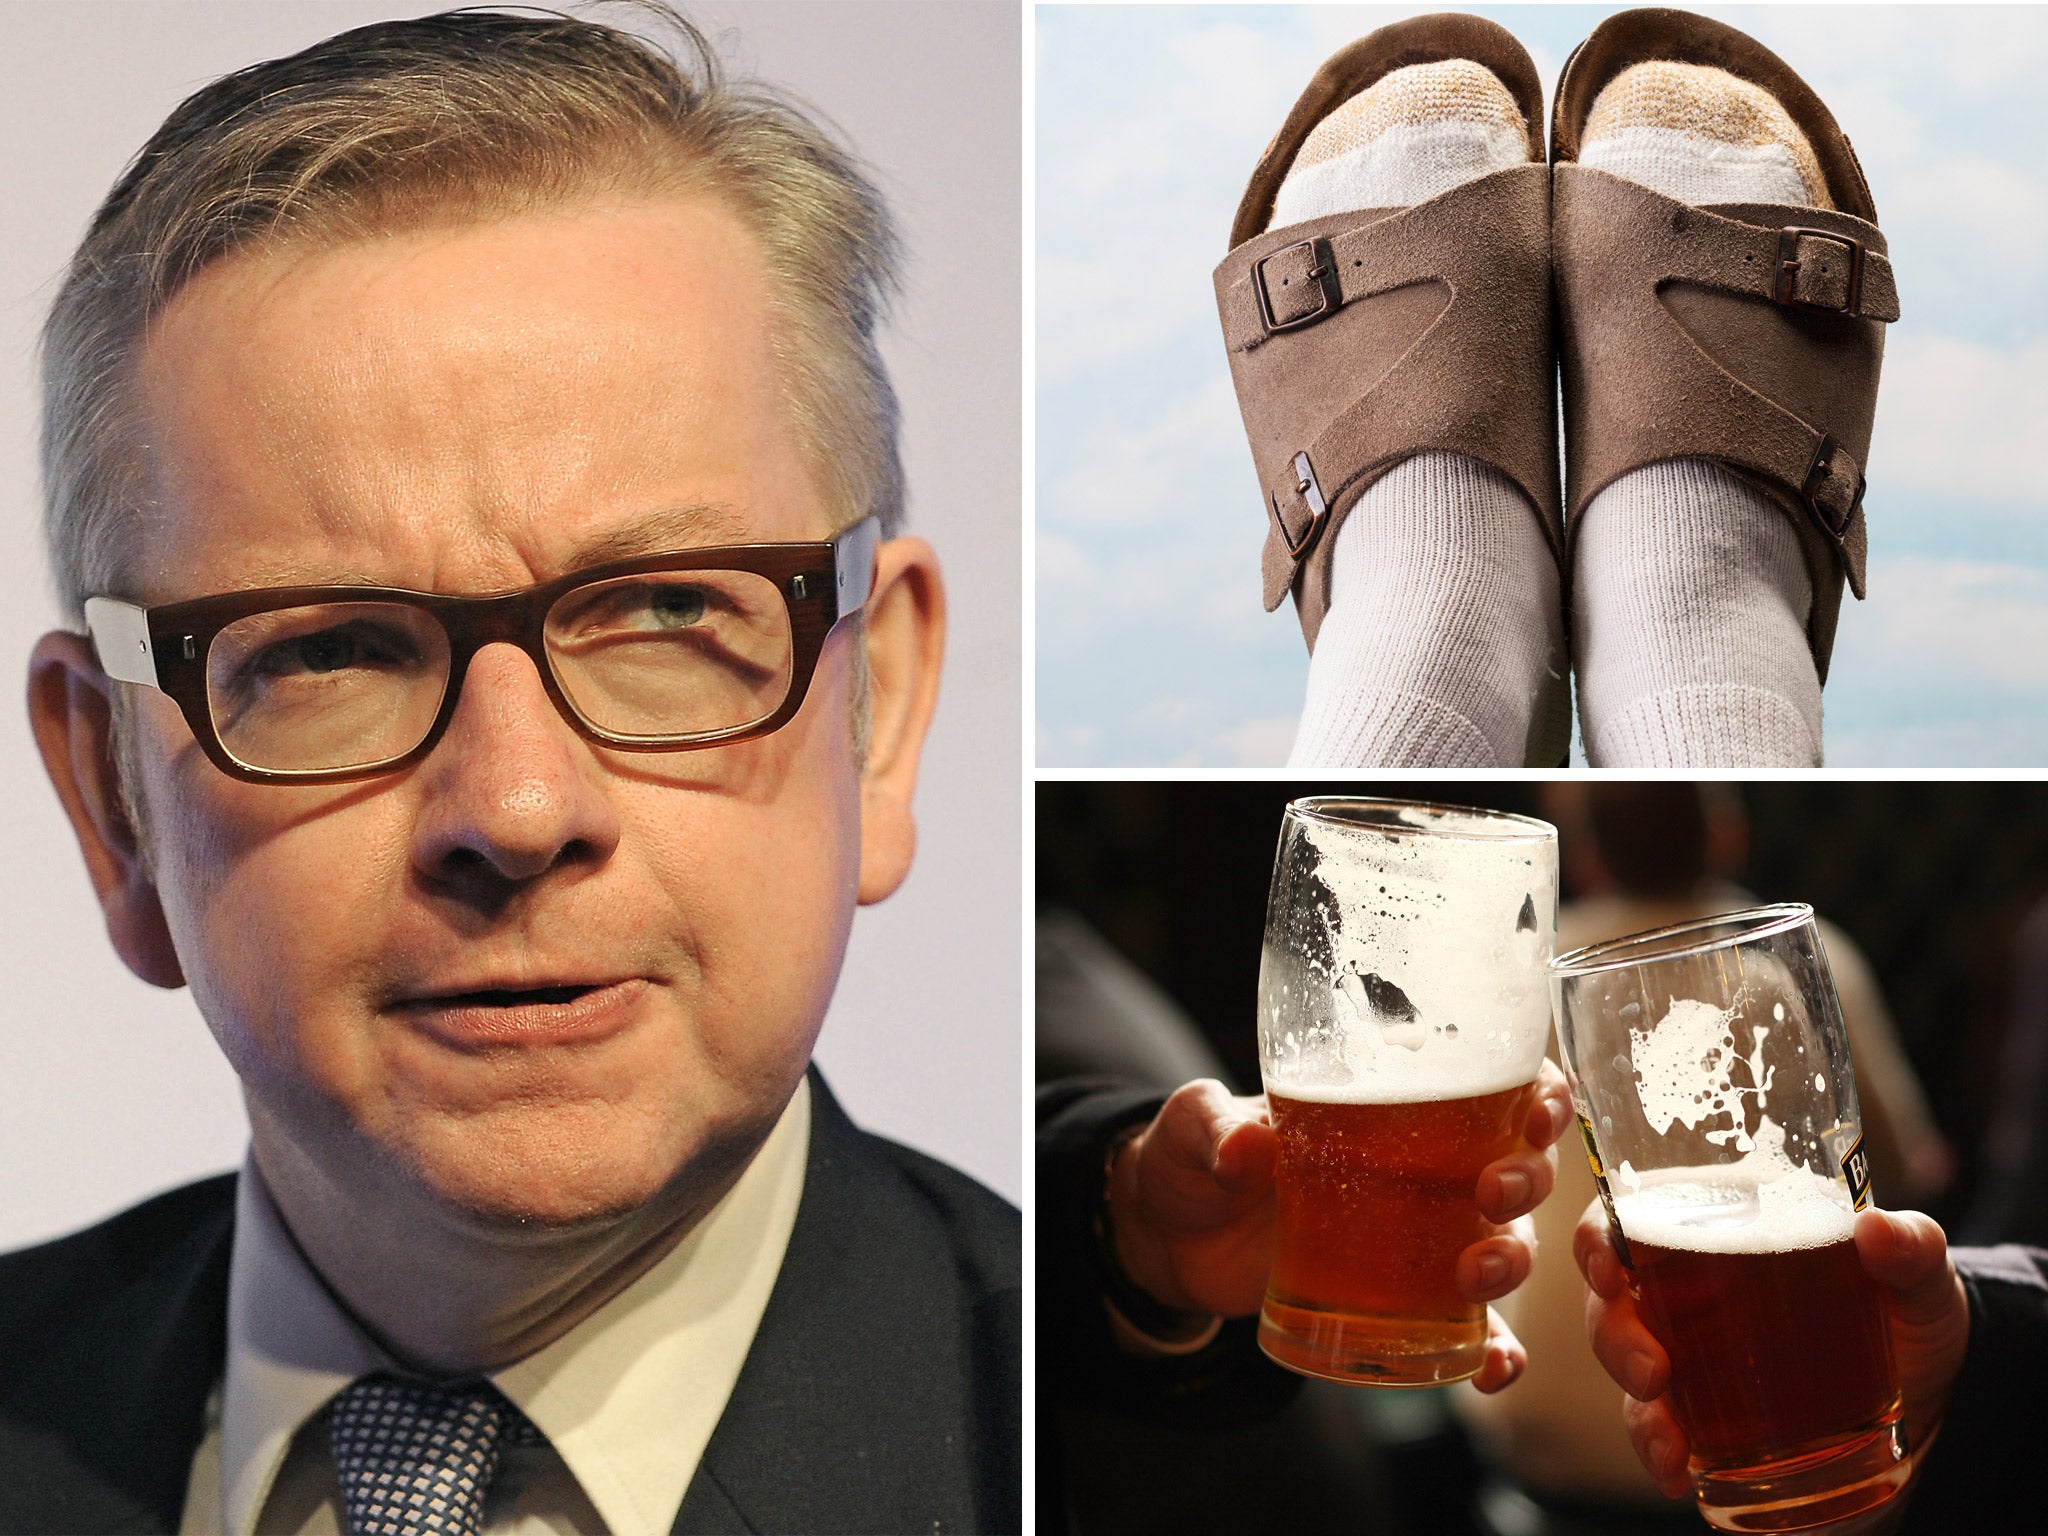 Socks and sandals and warm beer were among the British values suggested by Twitter users in response to Michael Gove's announcement